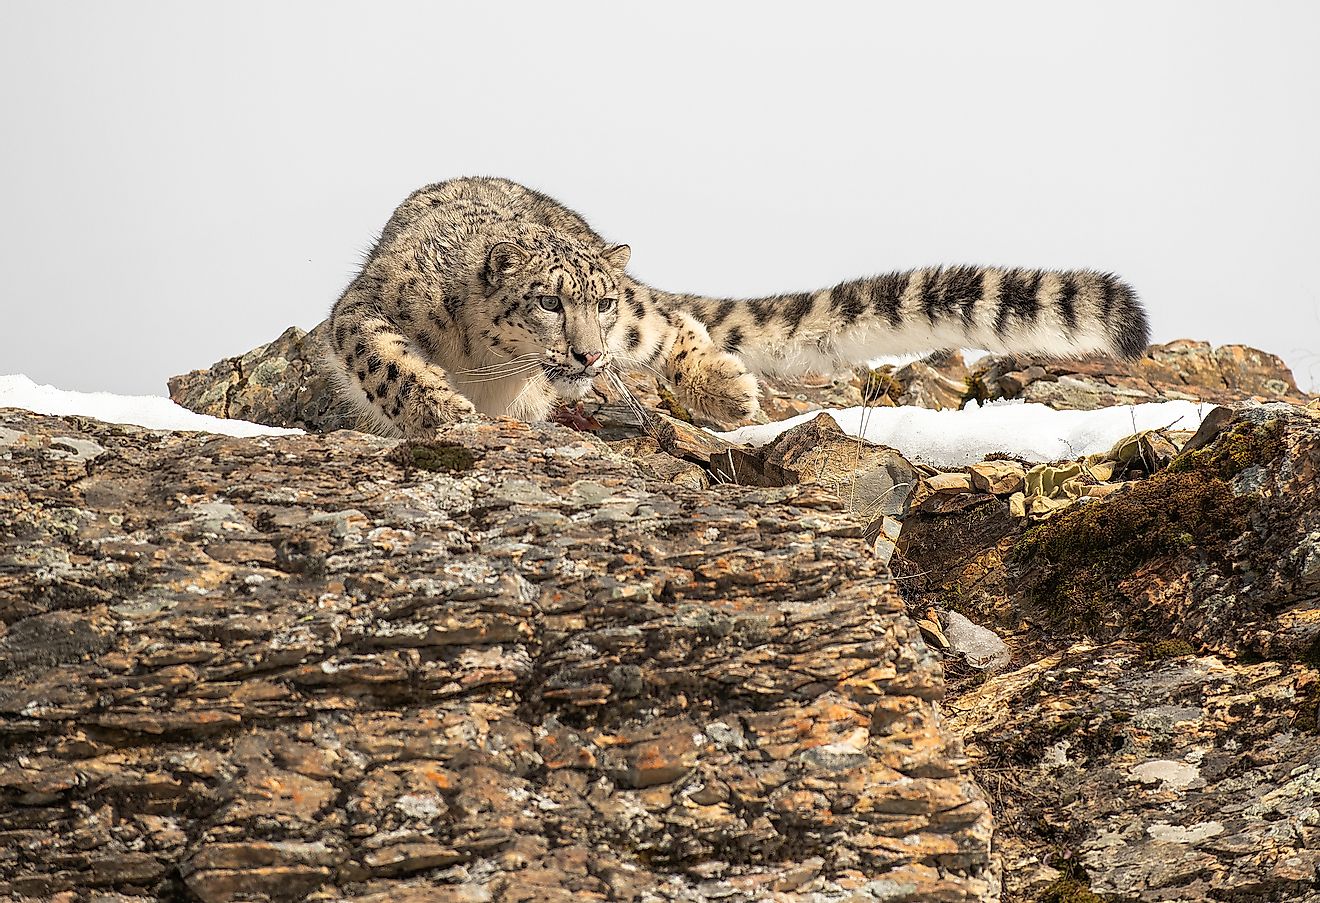 Snow leopard in the Himalayas.